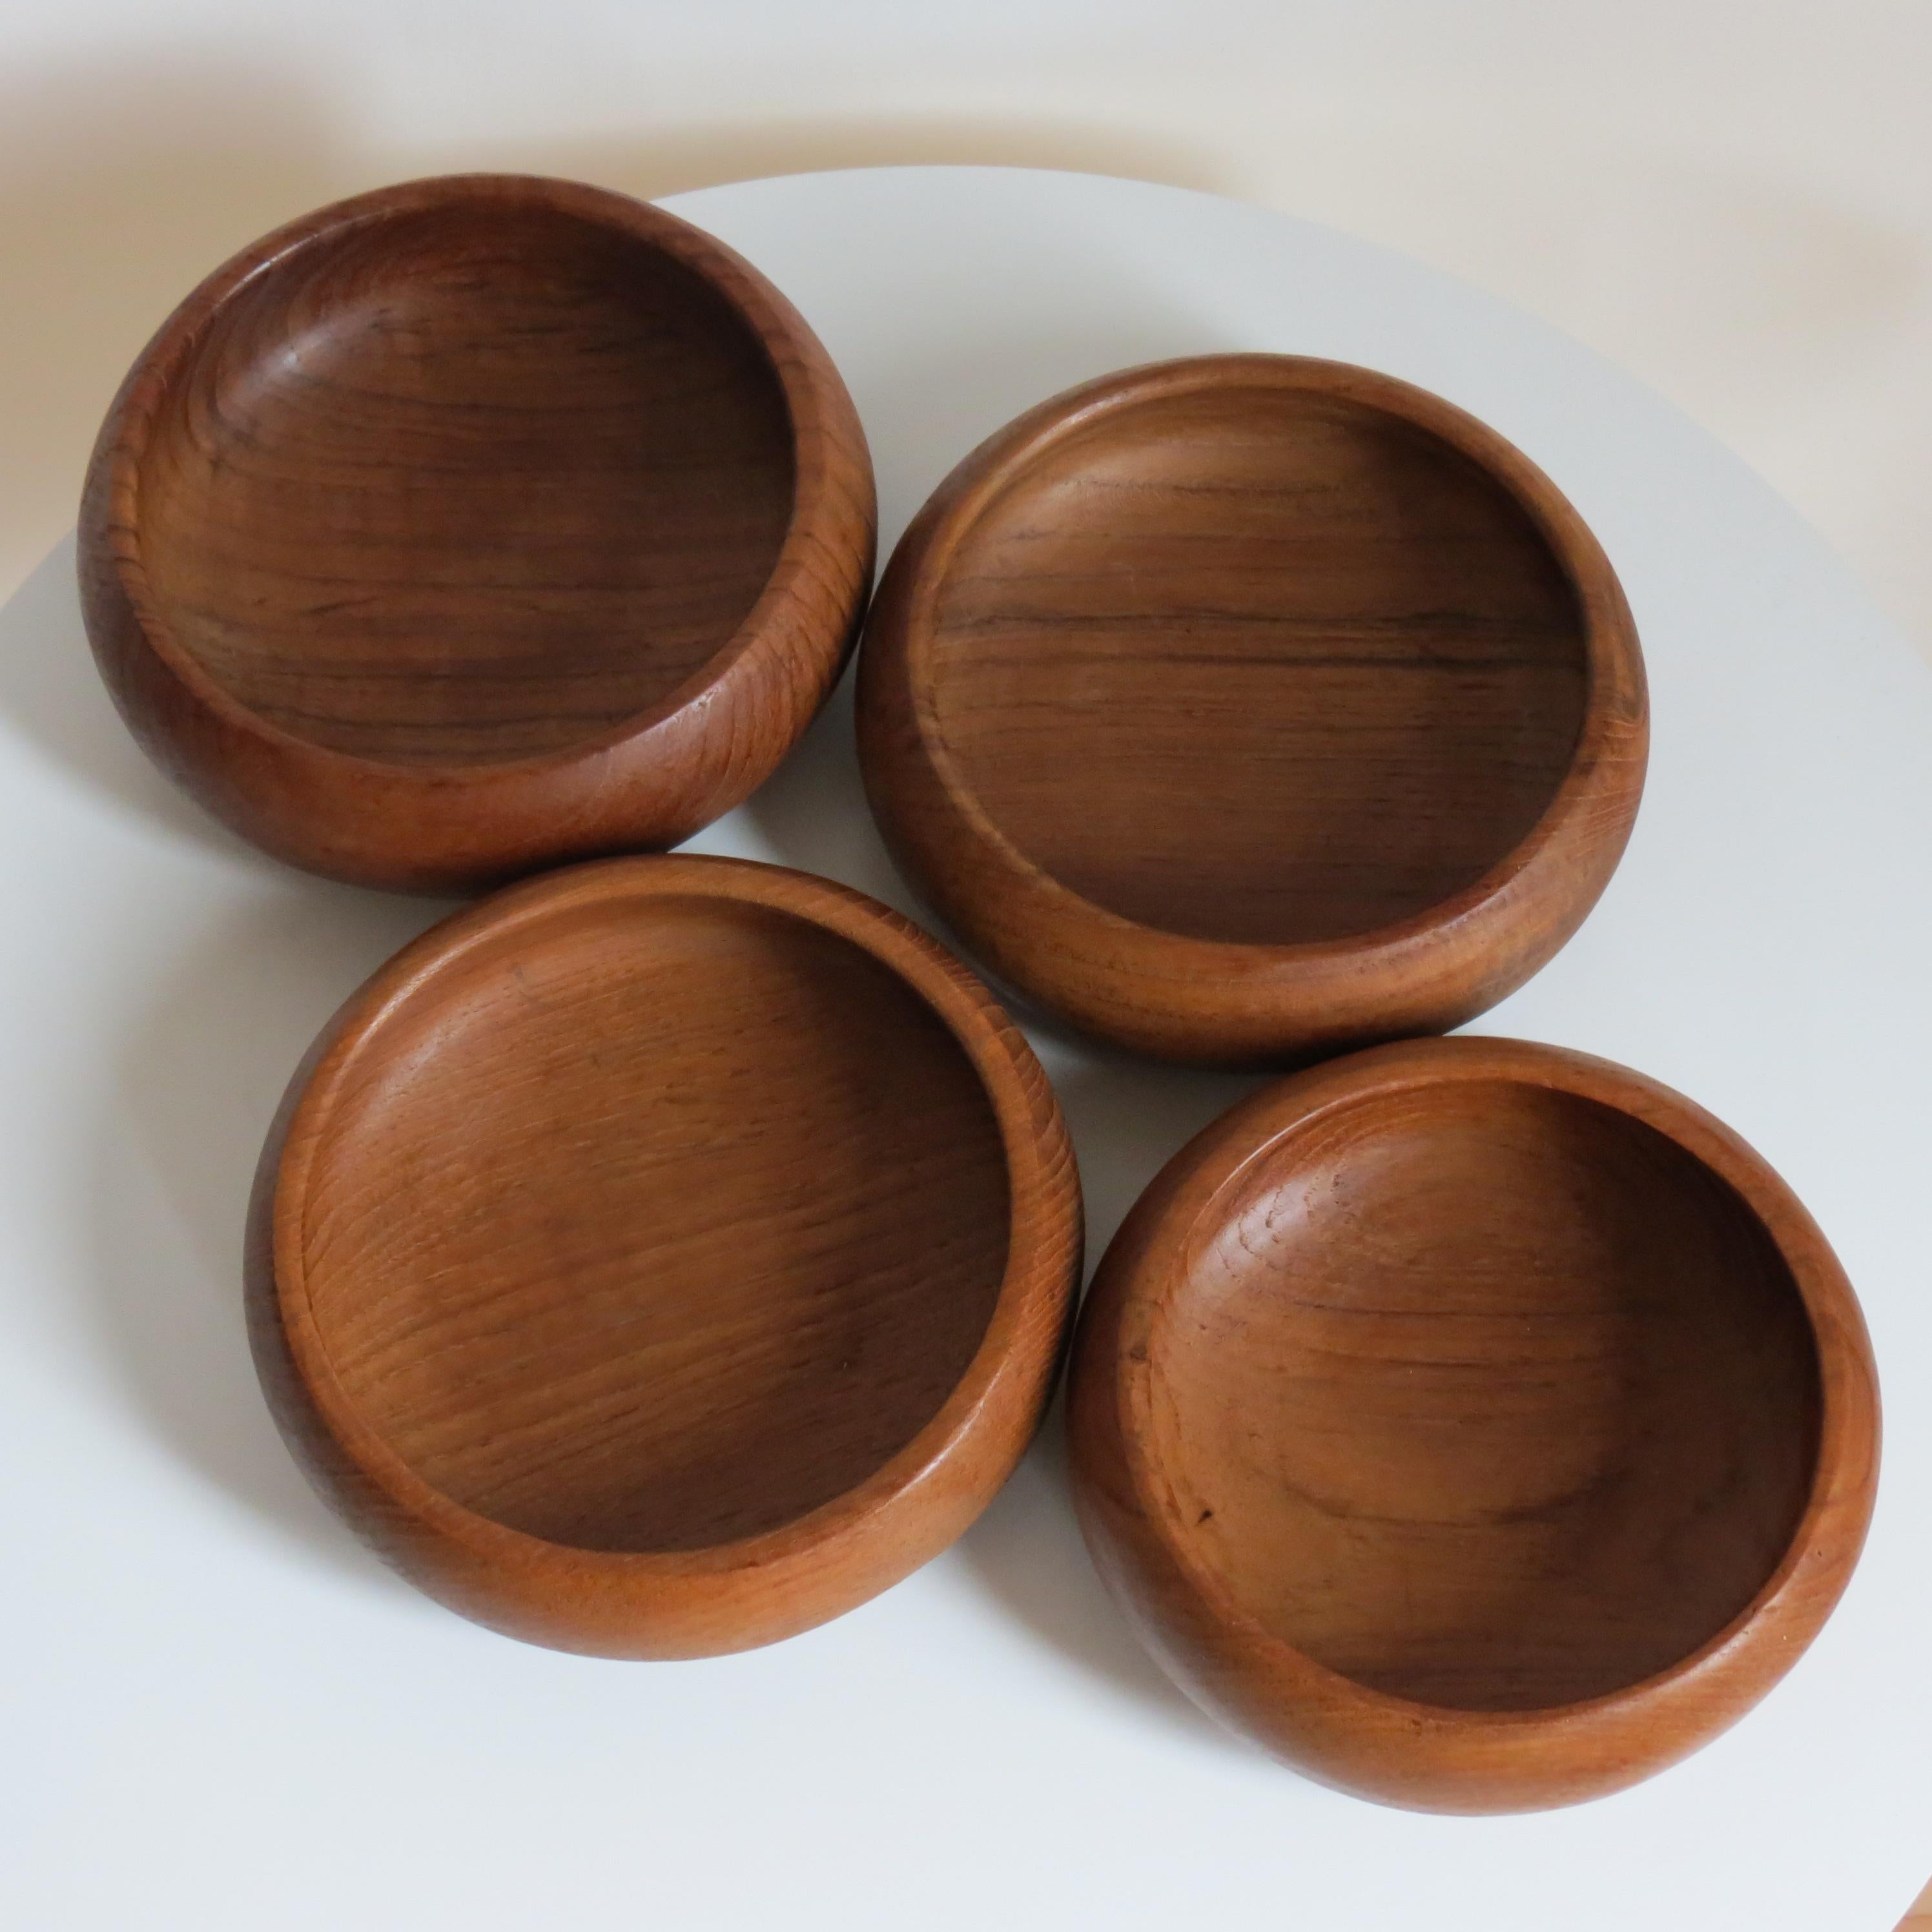 Wonderful set of 4 hand crafted Teak bowls.  Each bowl has been hand produced and they vary slightly in size.  Date from the 1960s. 
In good overall condition, minimal sizes of wear and use
Ideal snack bowls.
Please note the price for shipping to